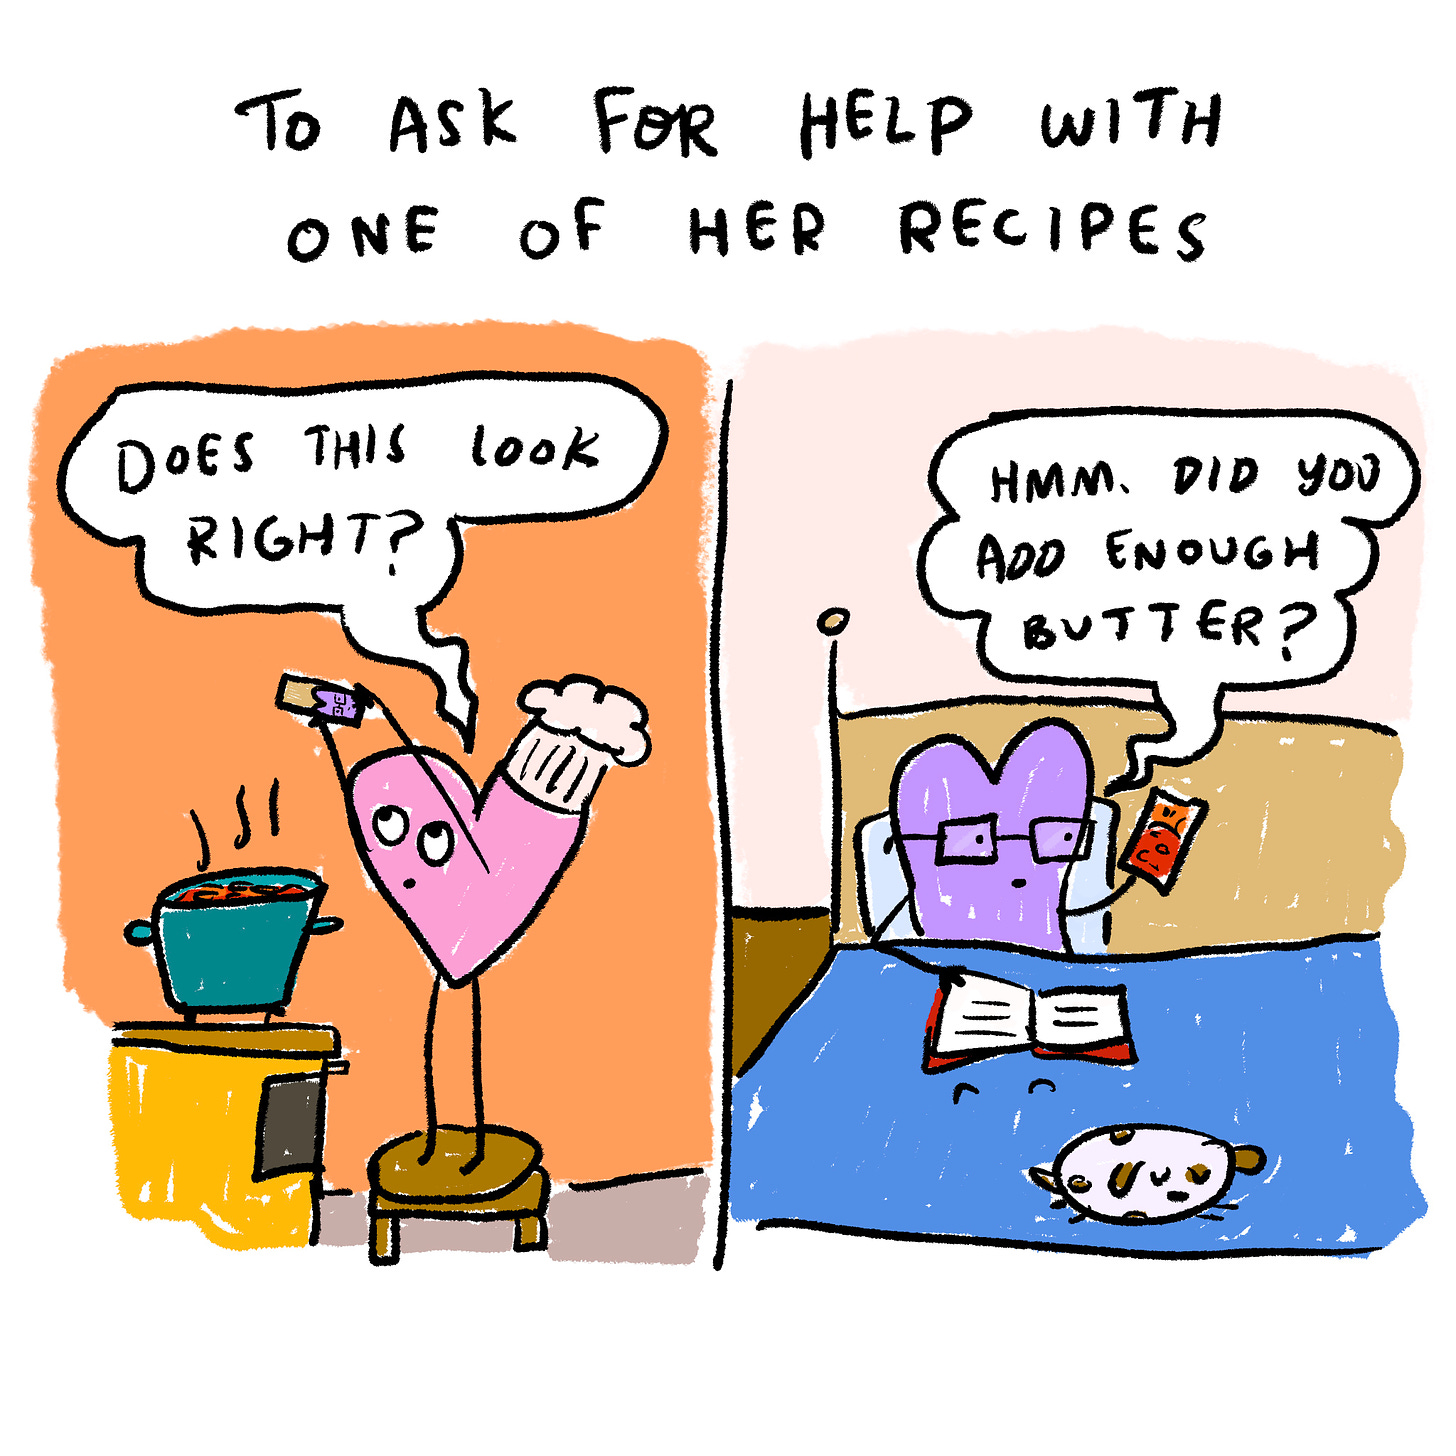  To ask for help with one of her recipes